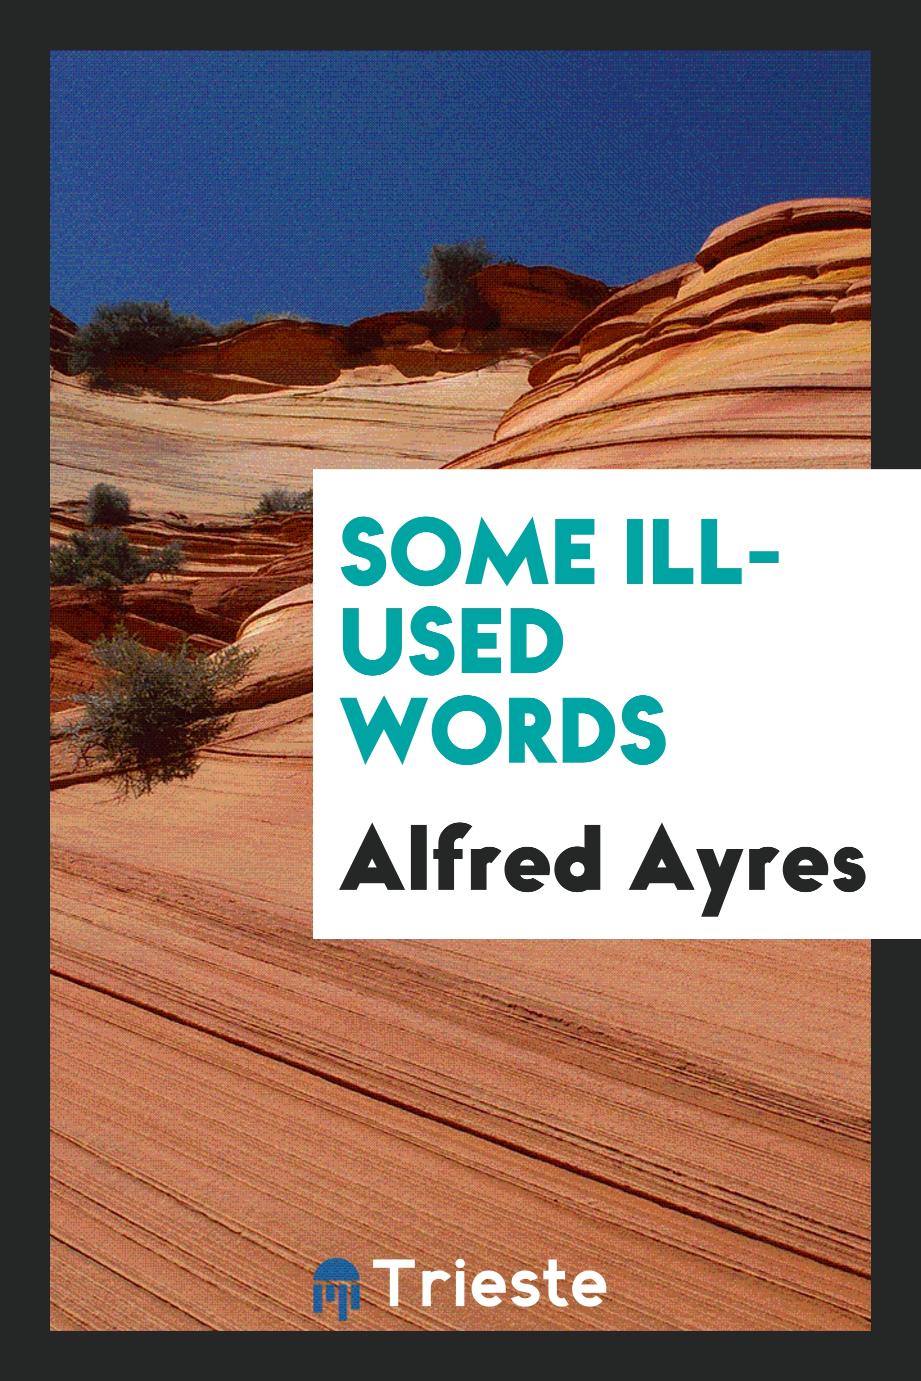 Some ill-used words